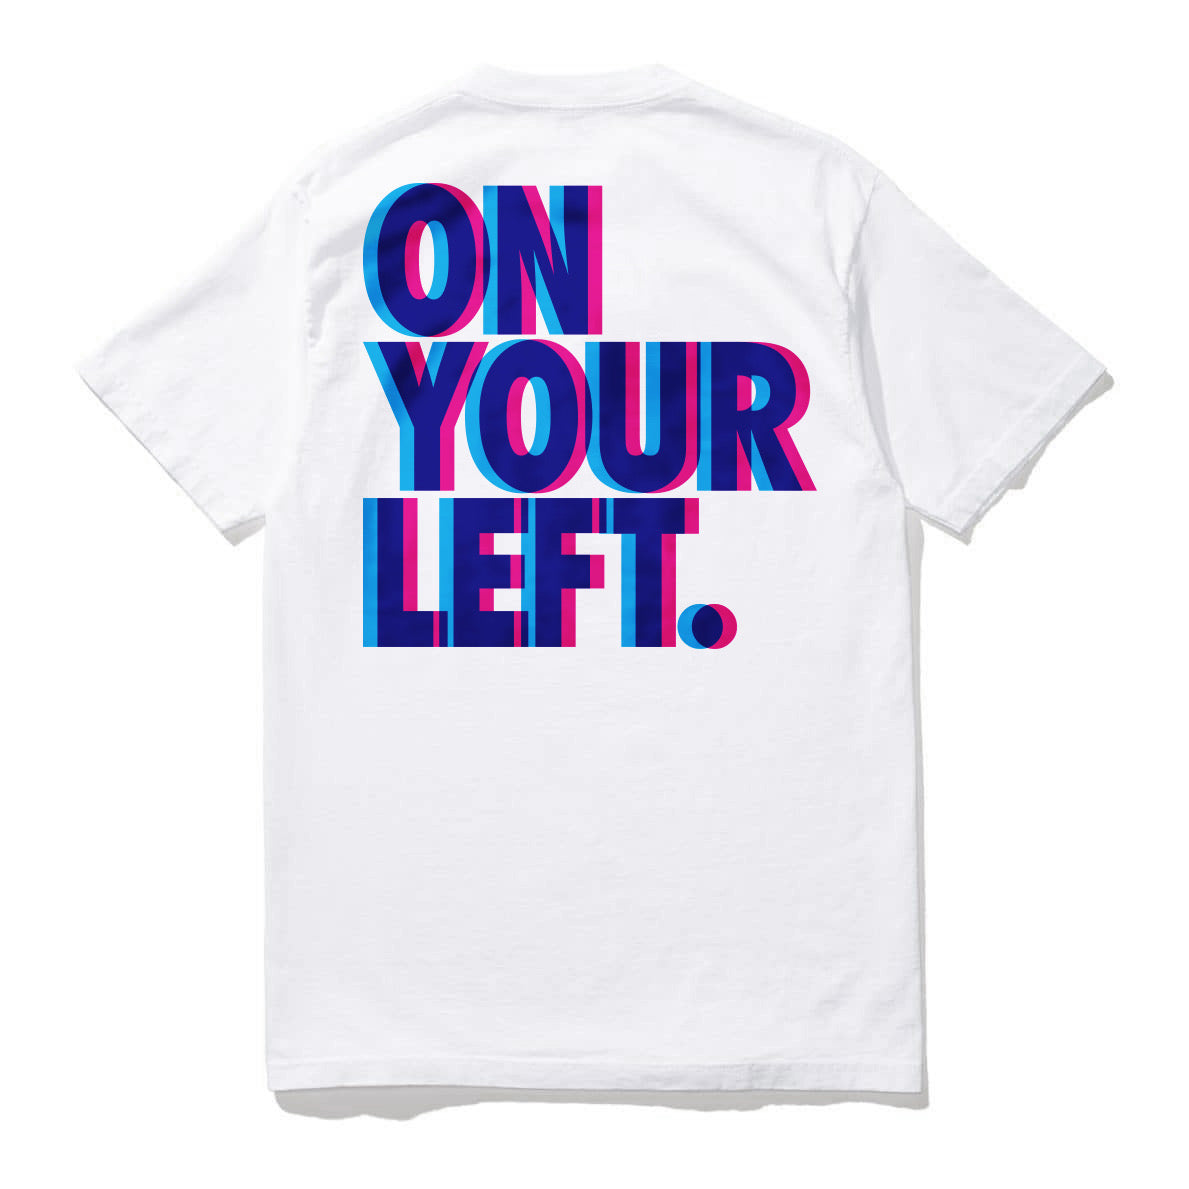 ON YOUR LEFT T-SHIRT